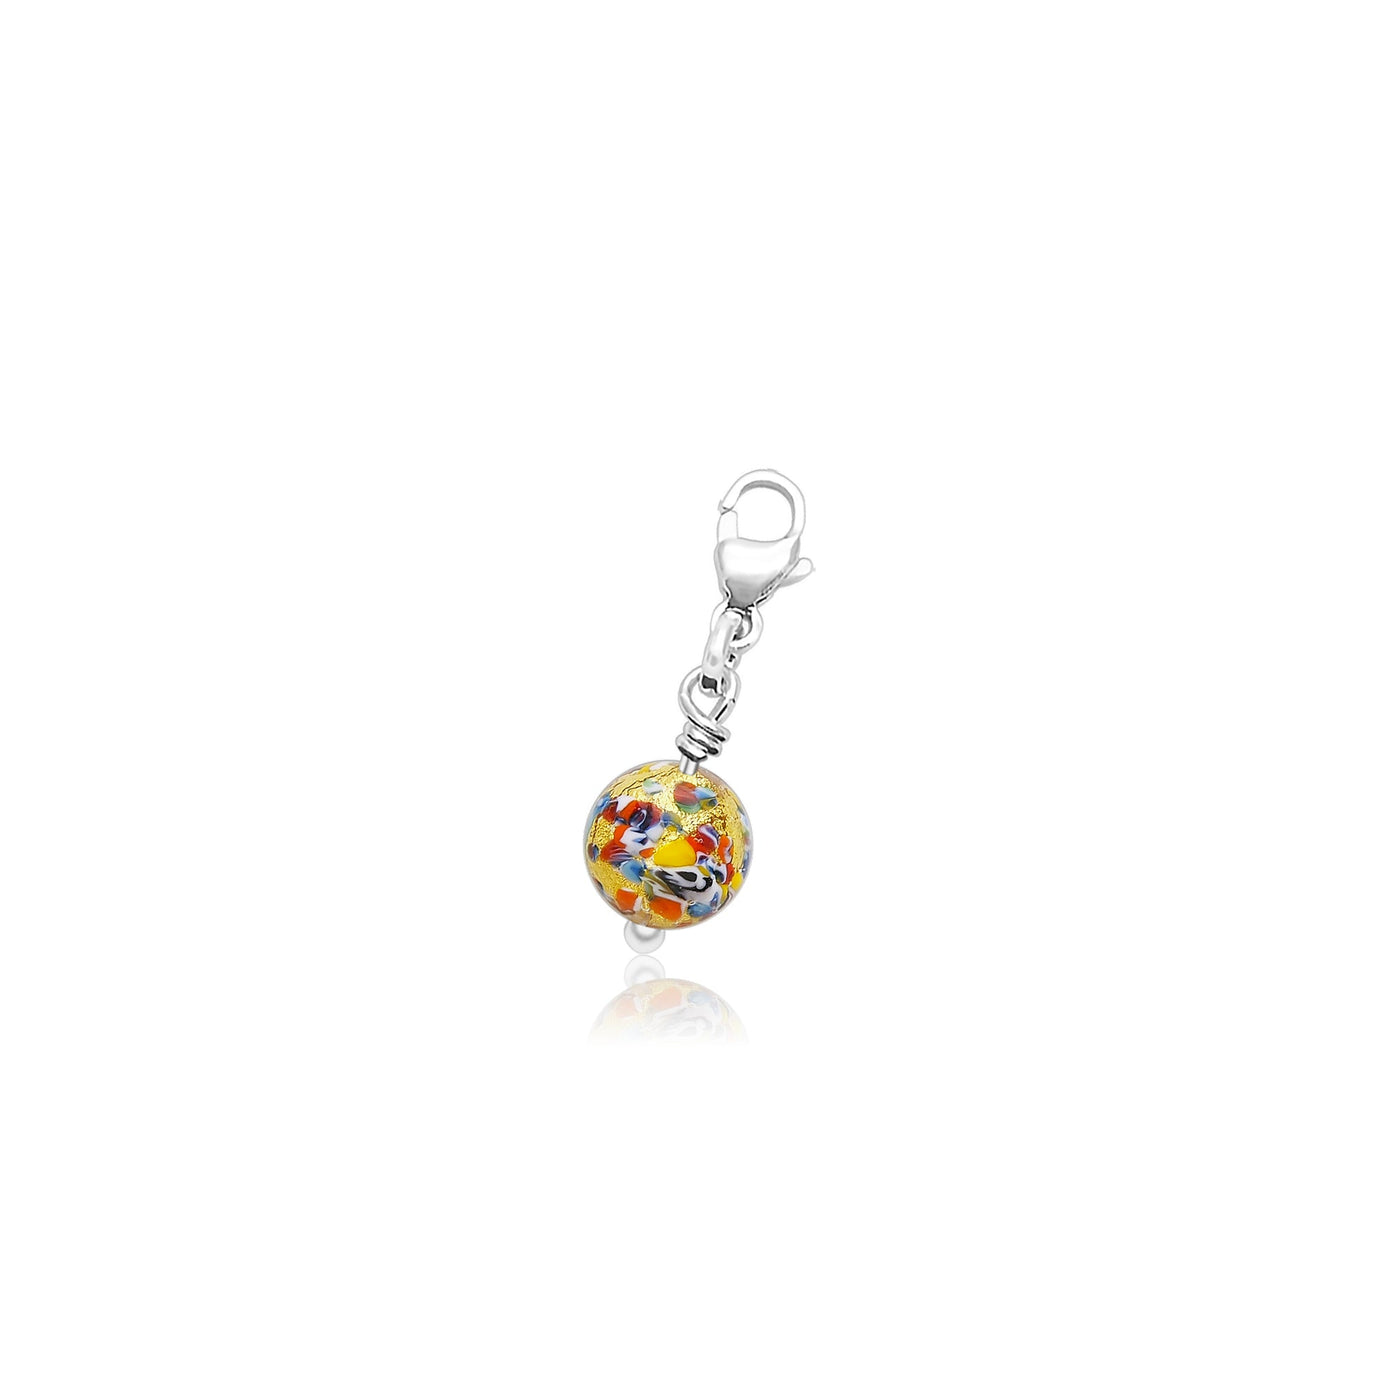 THE KISS | Round Charm - Gold - Charms